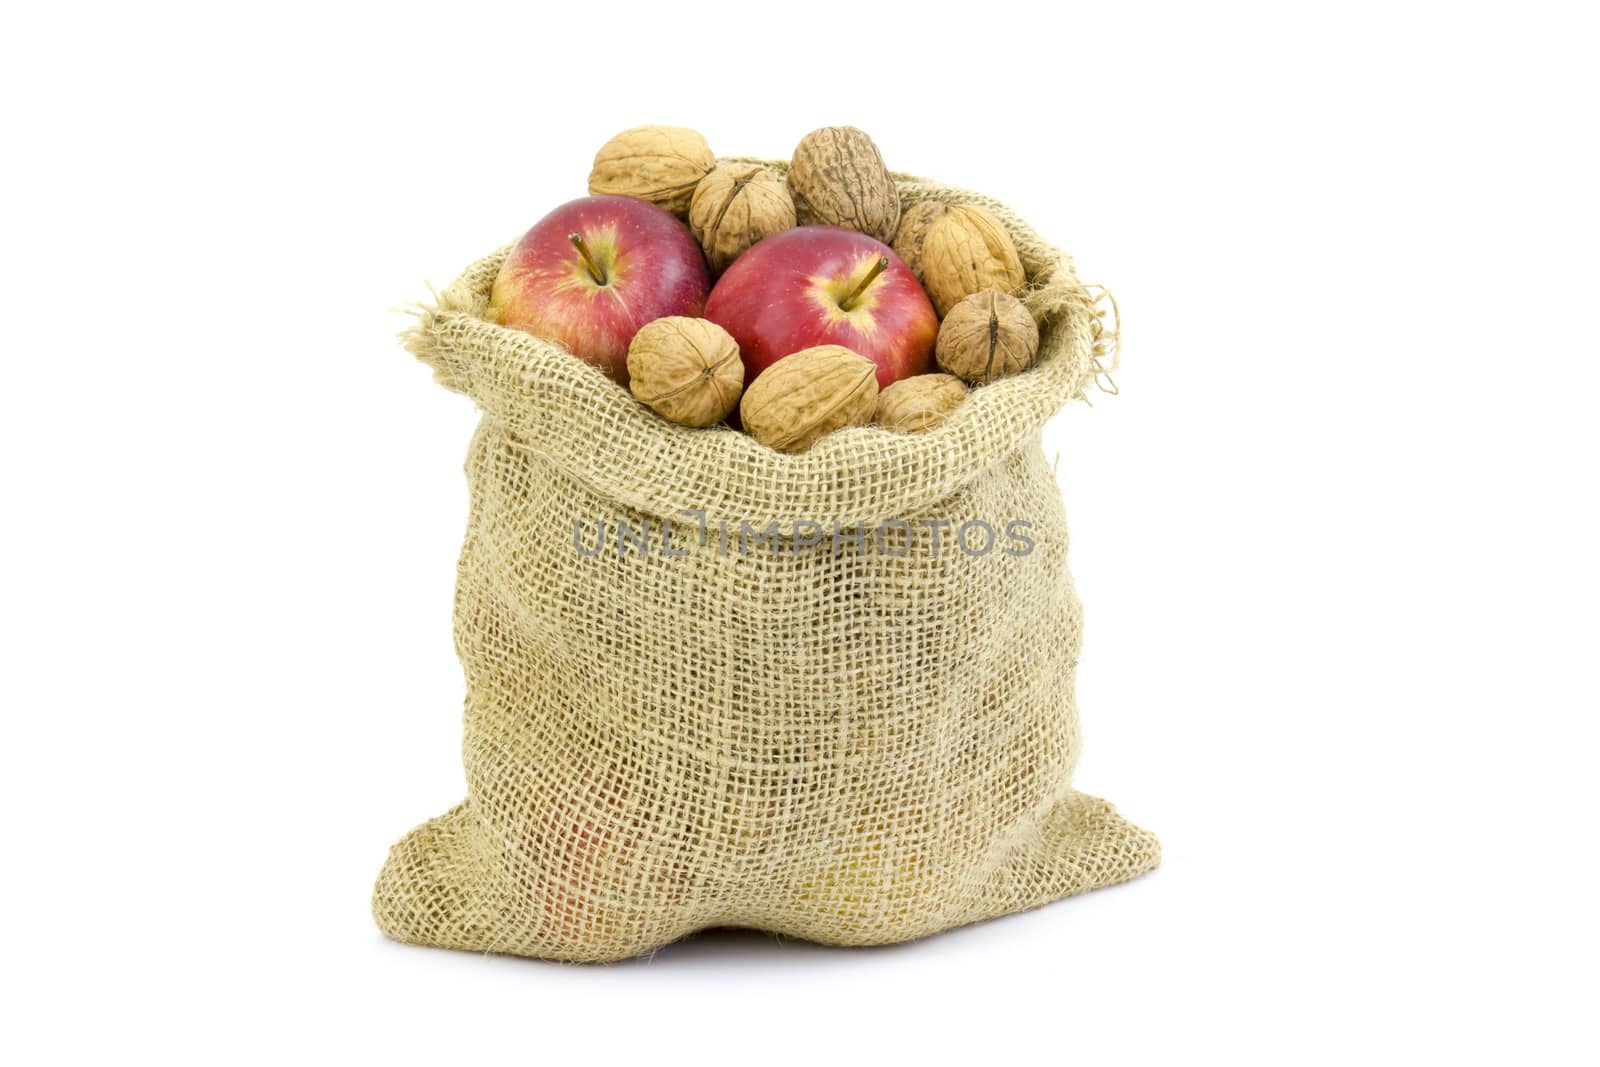 Burlap sack full of whole walnuts and apples